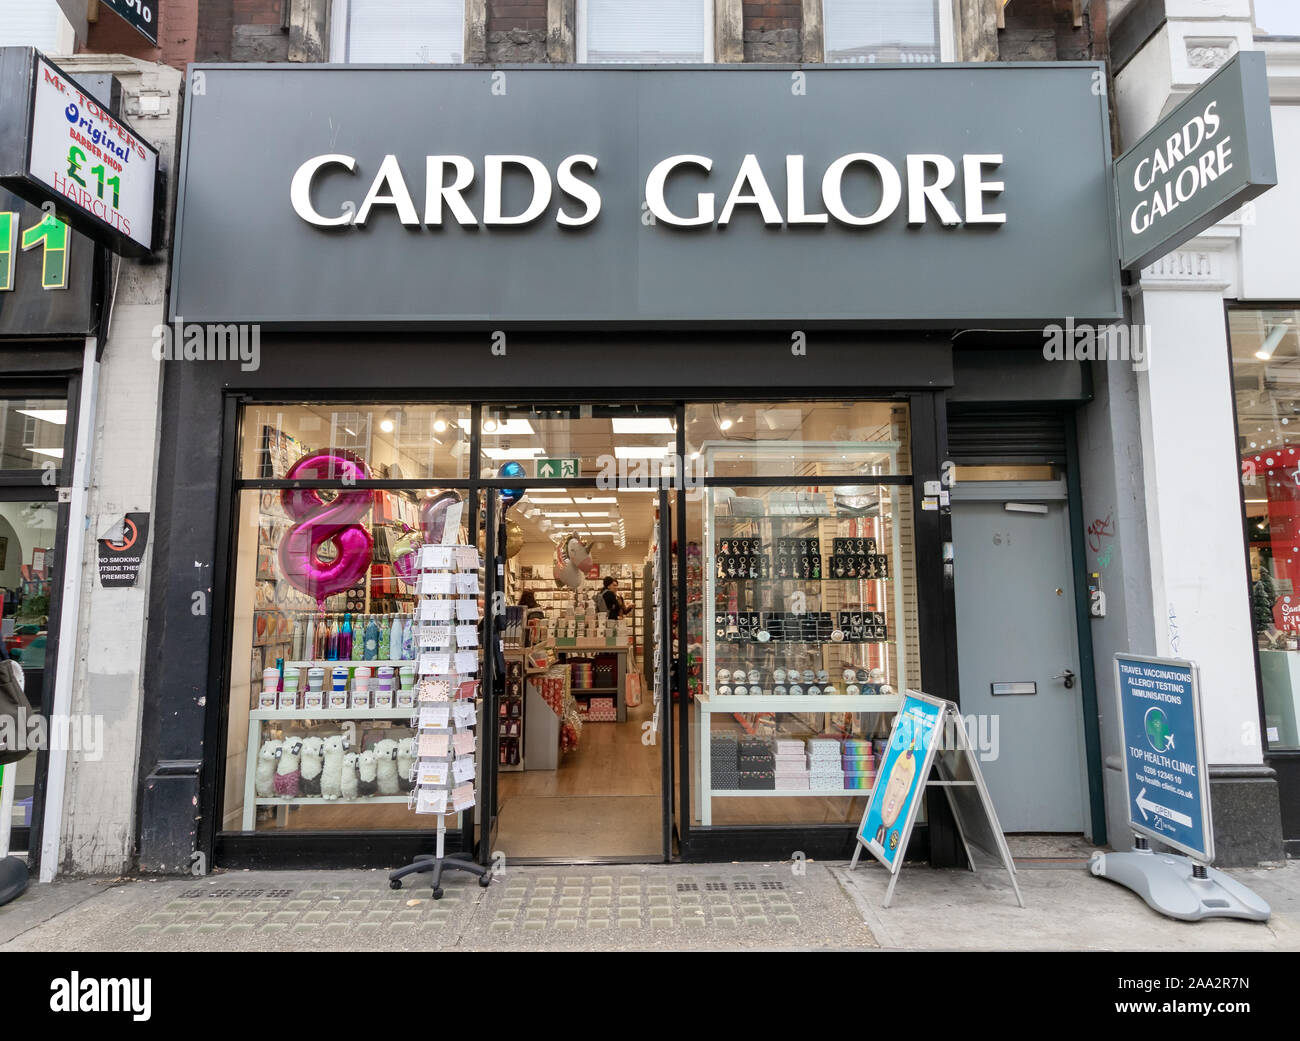 London / UK - November 13th 2019 - Cards Galore shop on Tottenham Court  Road. Cards Galore is a British chain of greeting card stores, with over 50  st Stock Photo - Alamy